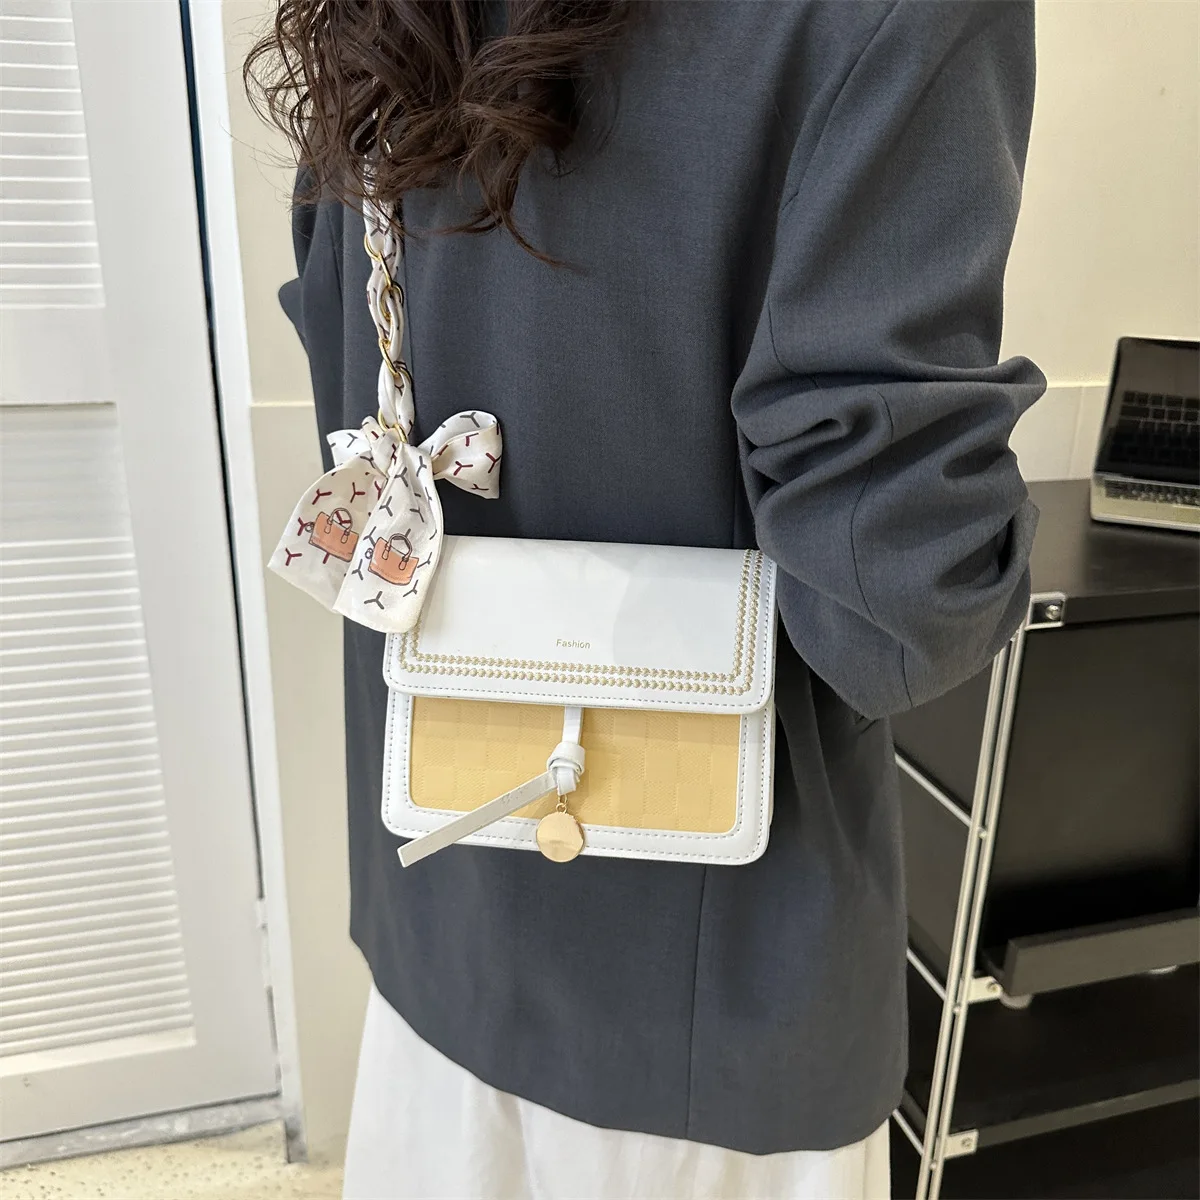 

Online Celebrity Fashion Contrast Stitching Fashion Small Bag Female Summer Small Fresh Foreign Style Slung Small Shoulder Bag